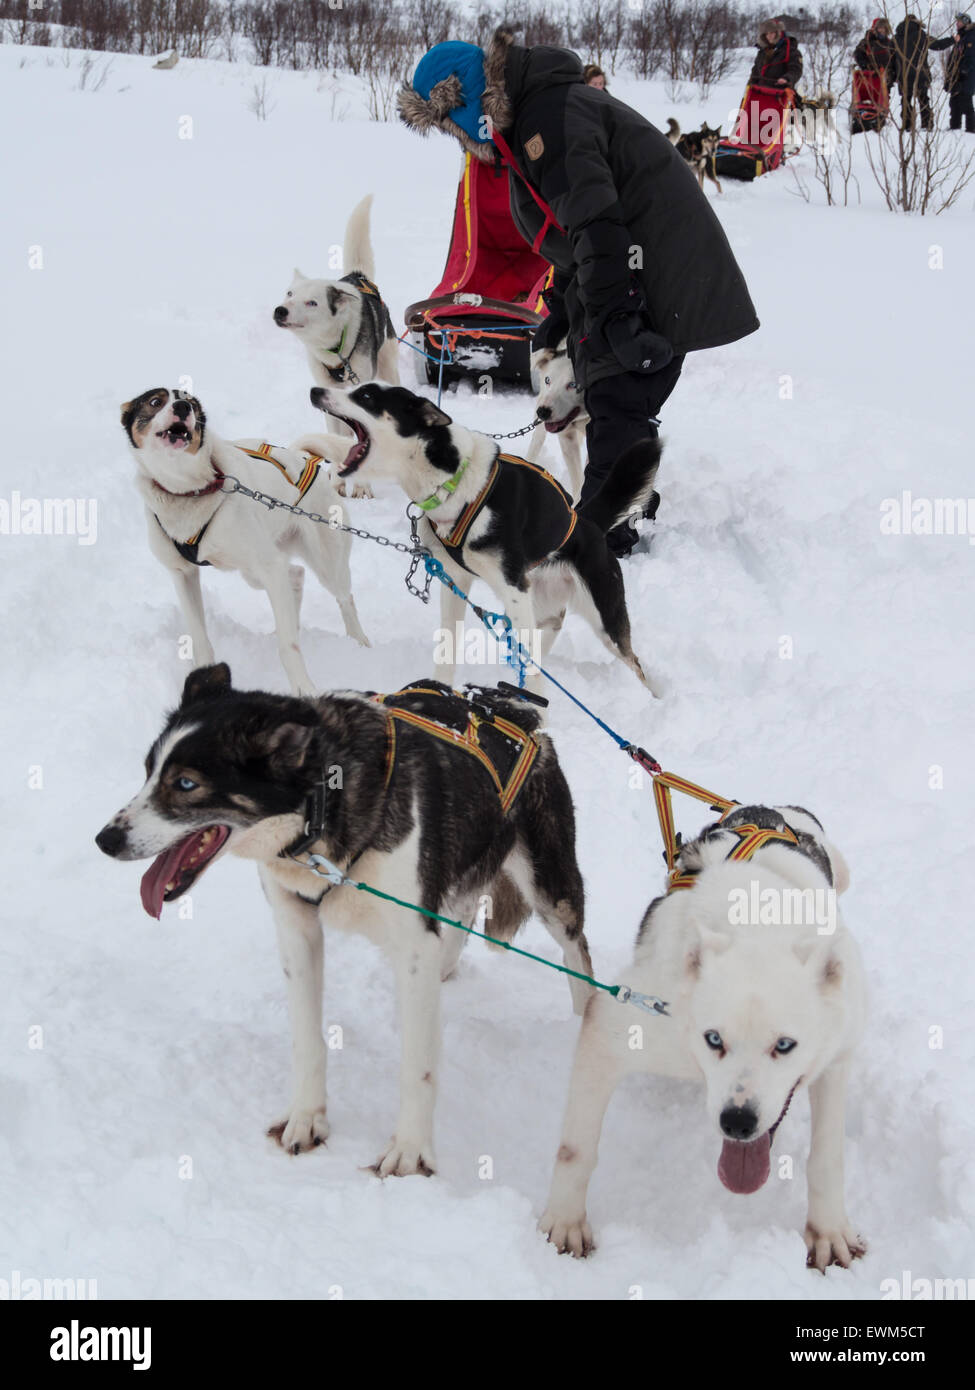 Petting siberian huskies lined up before sledding in the snow covered landscape Stock Photo